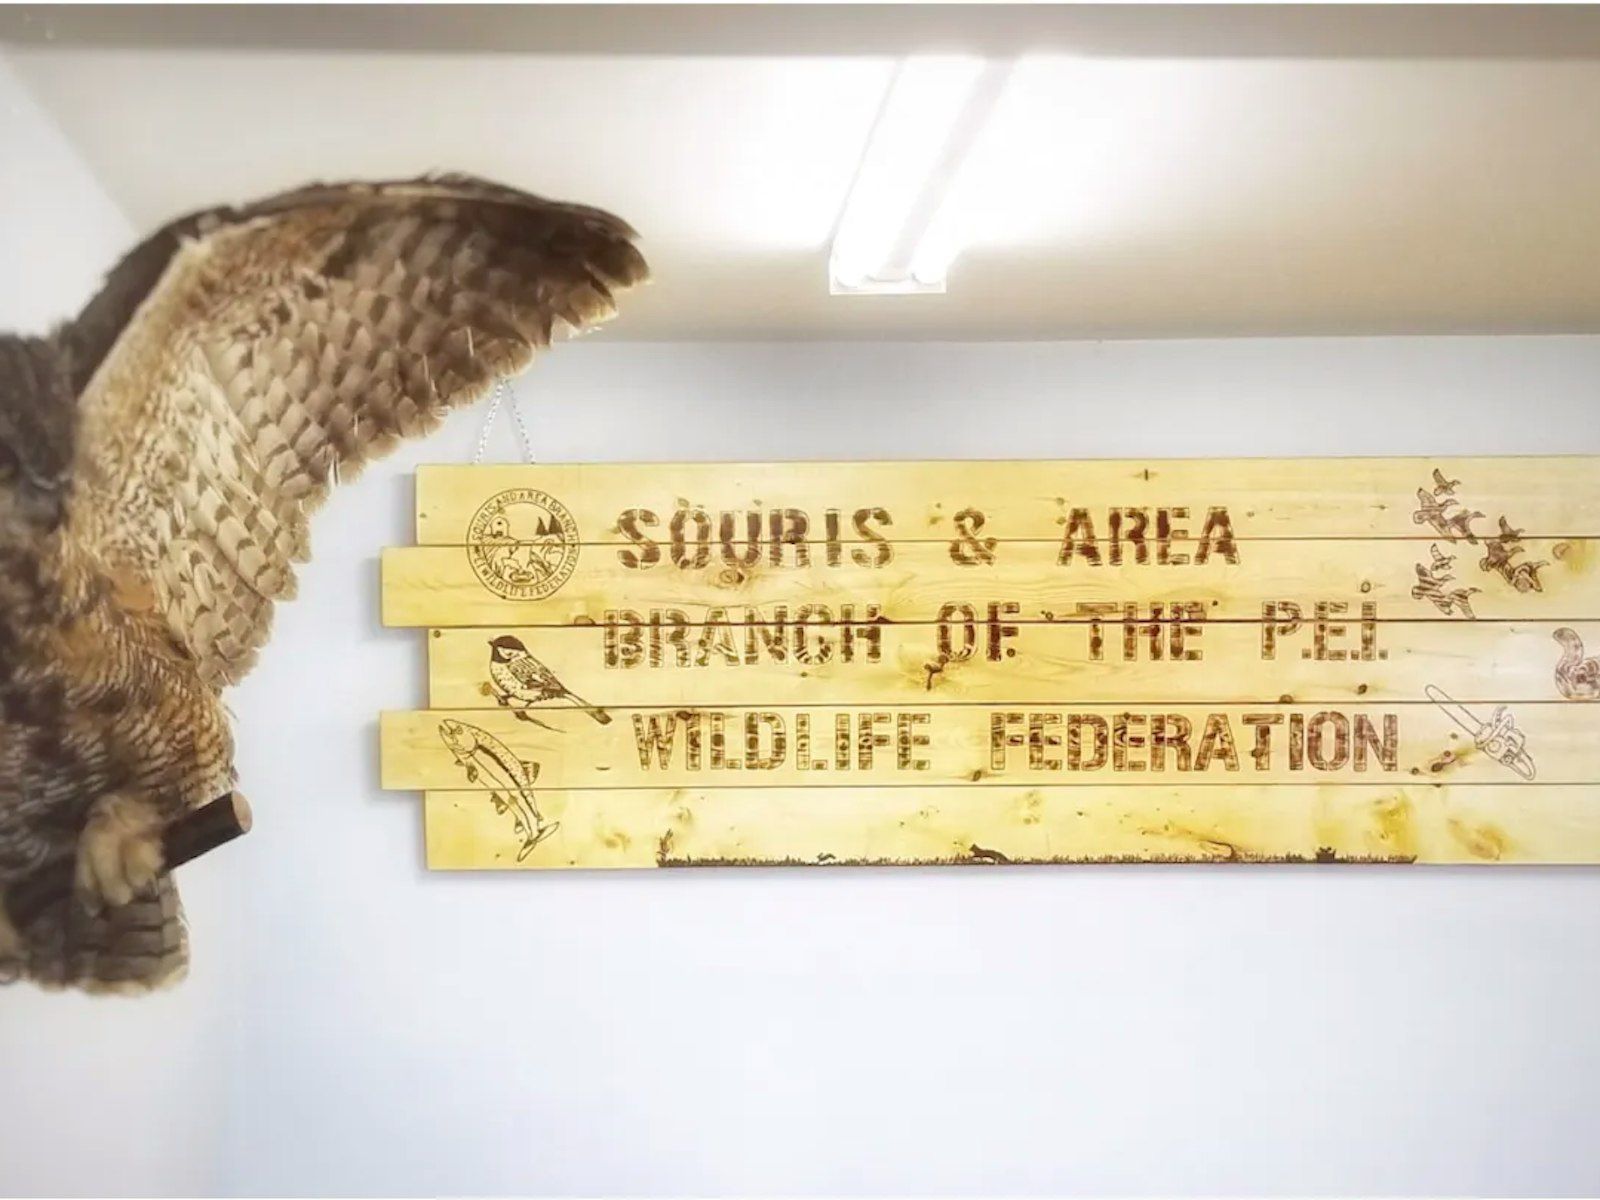 Wooden sign reading 'Souris & Area Branch of the PEI Wildlife Federation'